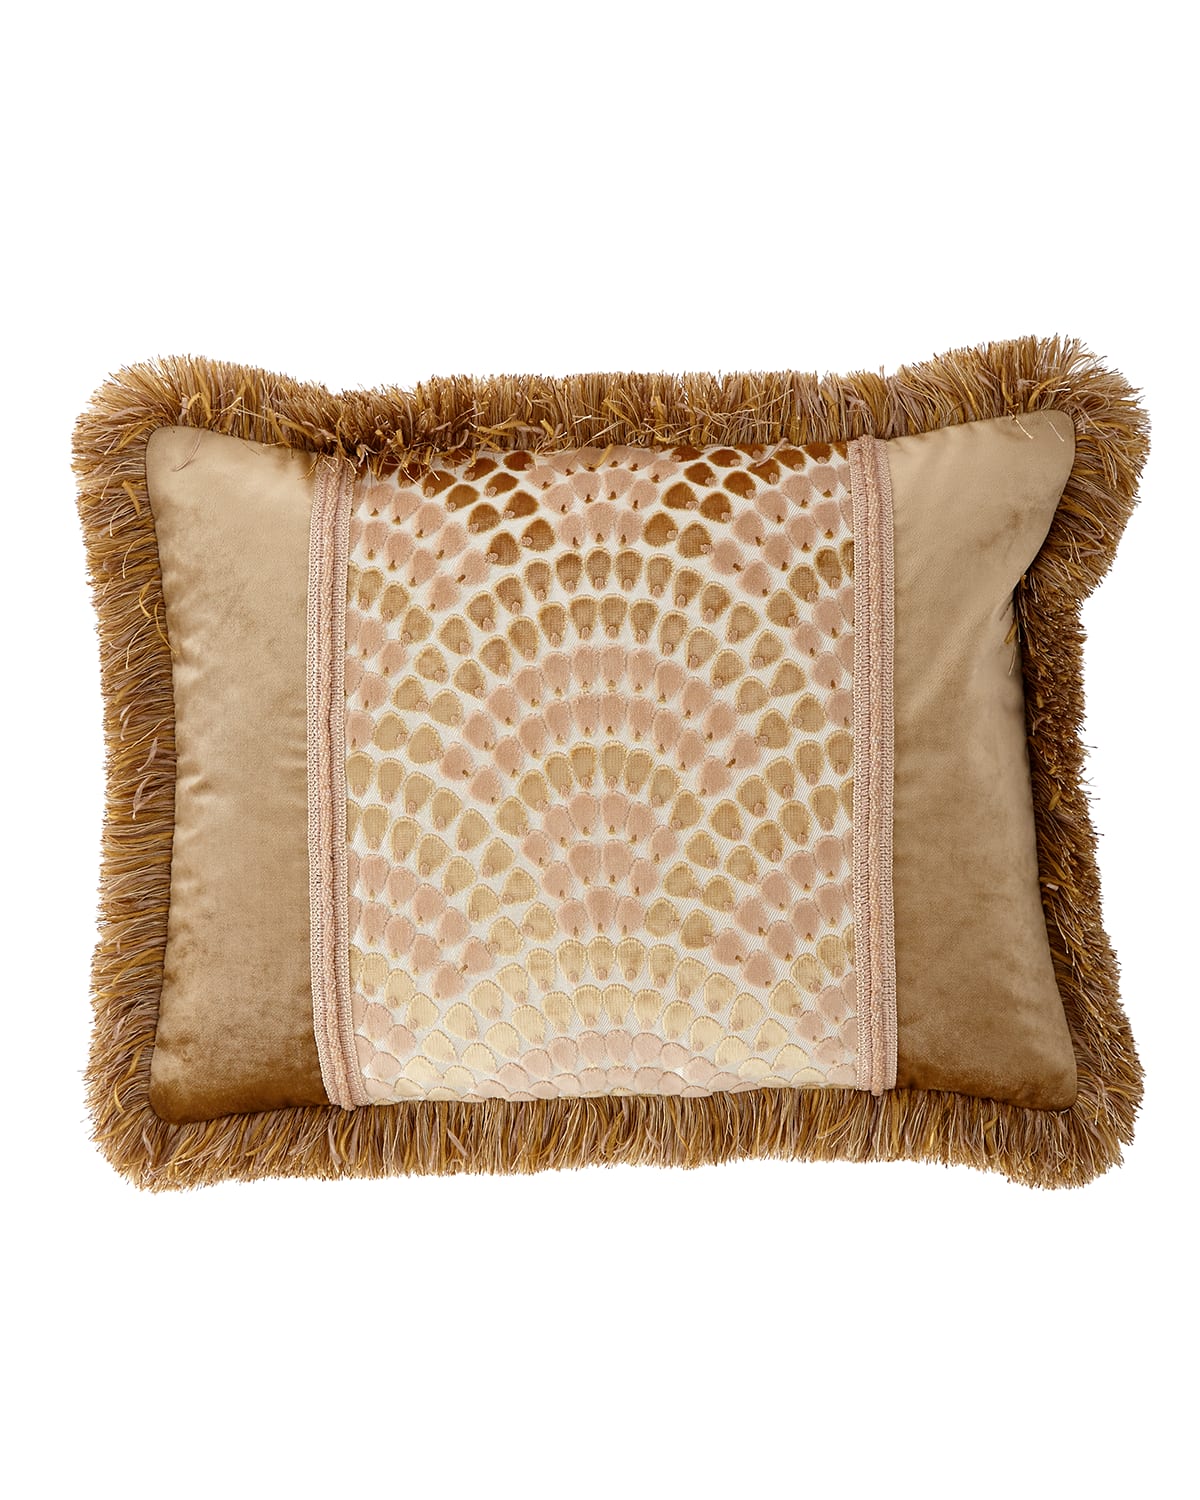 Image Dian Austin Couture Home Rosamaria King Sham with Fringe